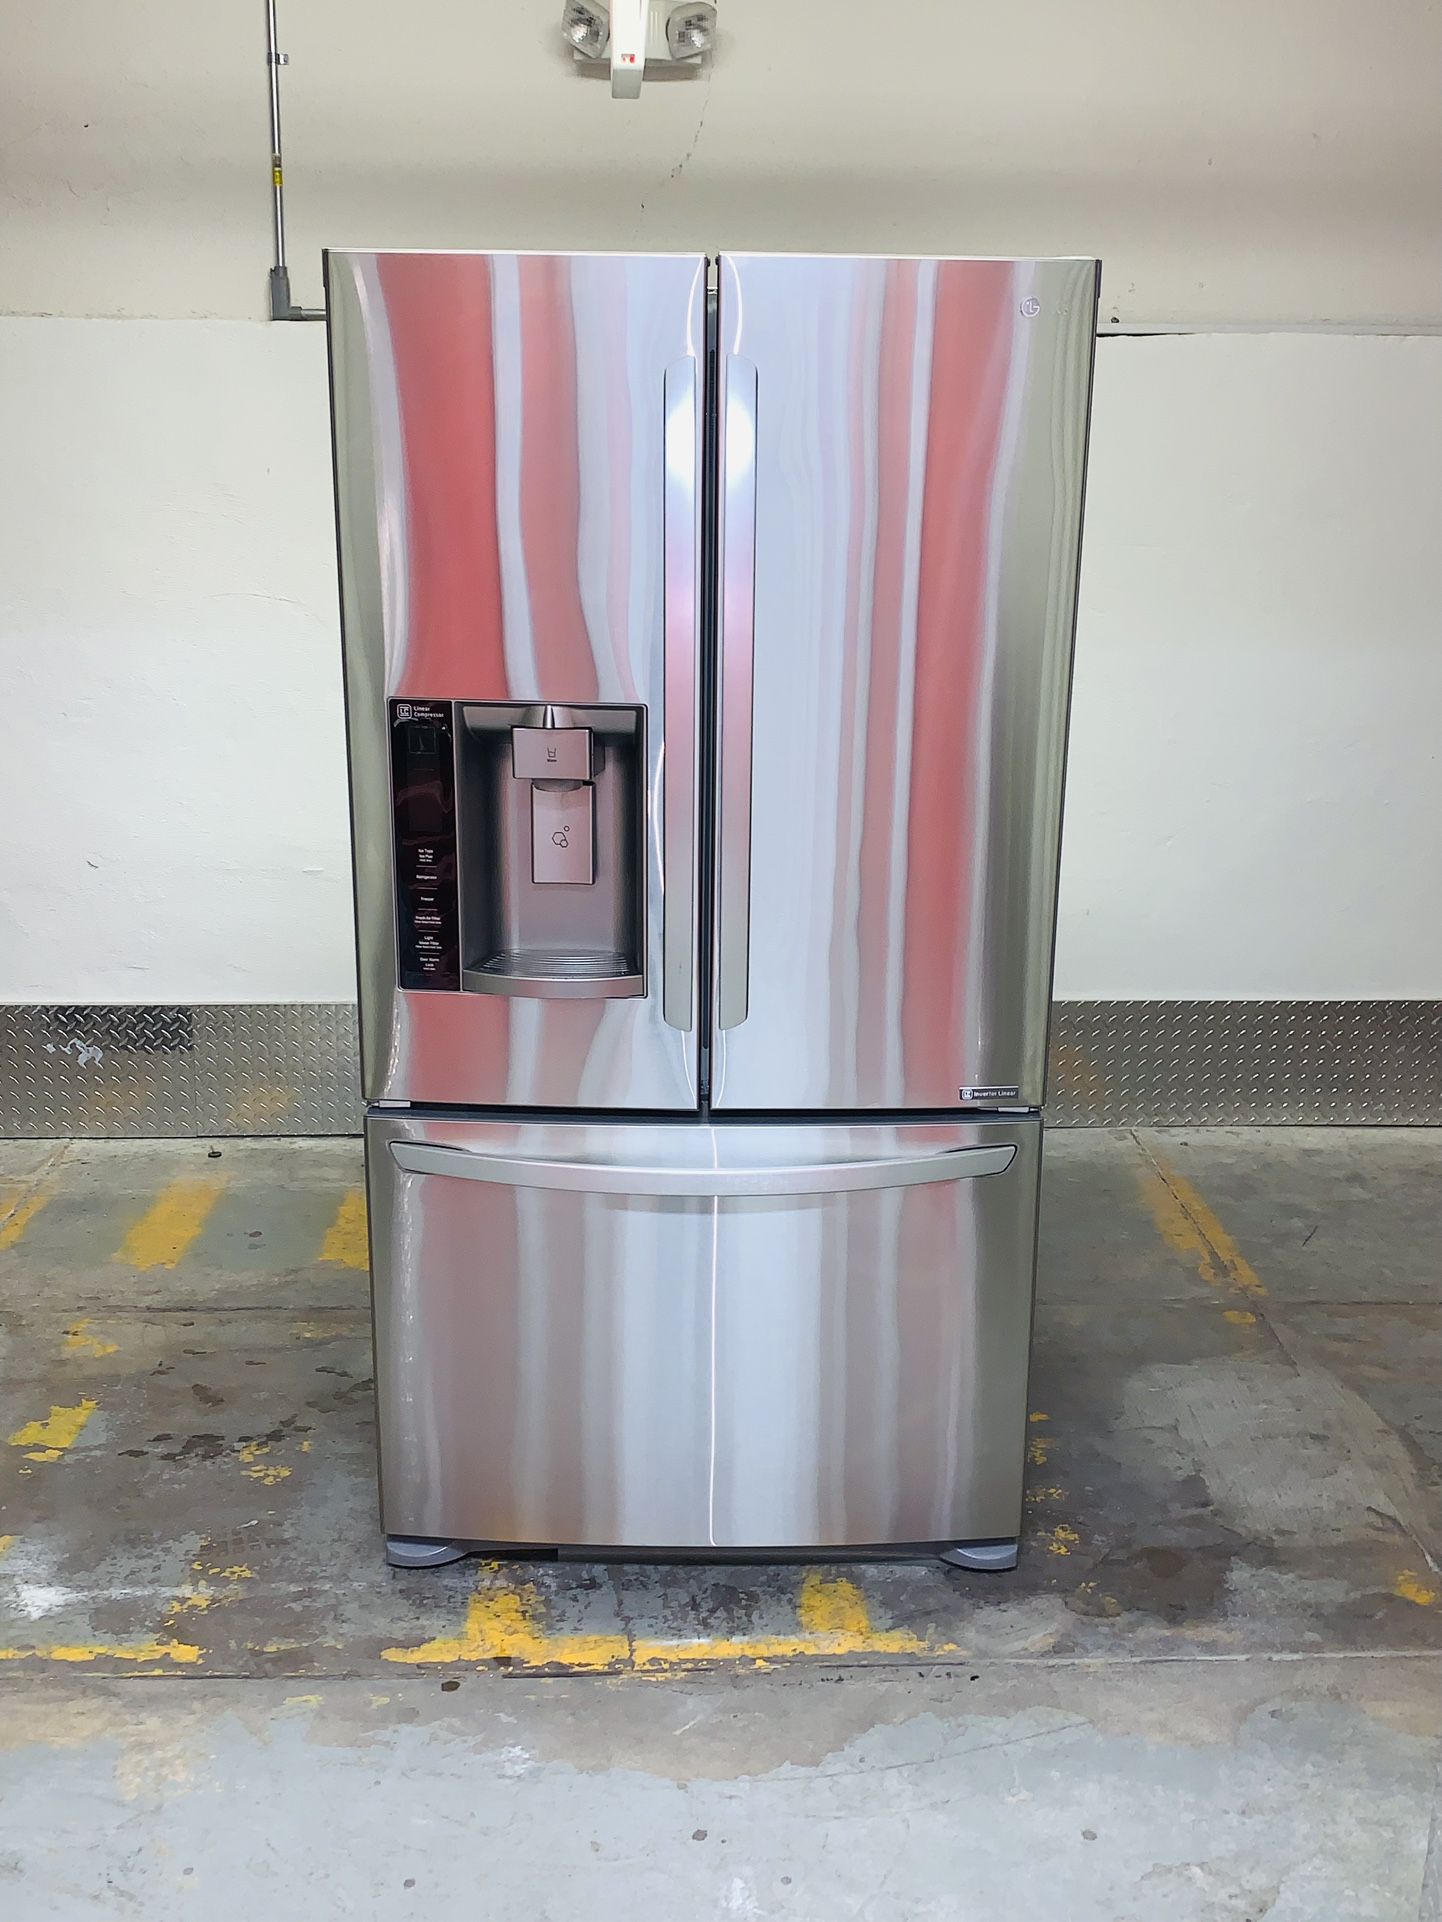 LG refrigerator 36X69X29 stainless steel in very perfect condition a receipt for 90 days warranty